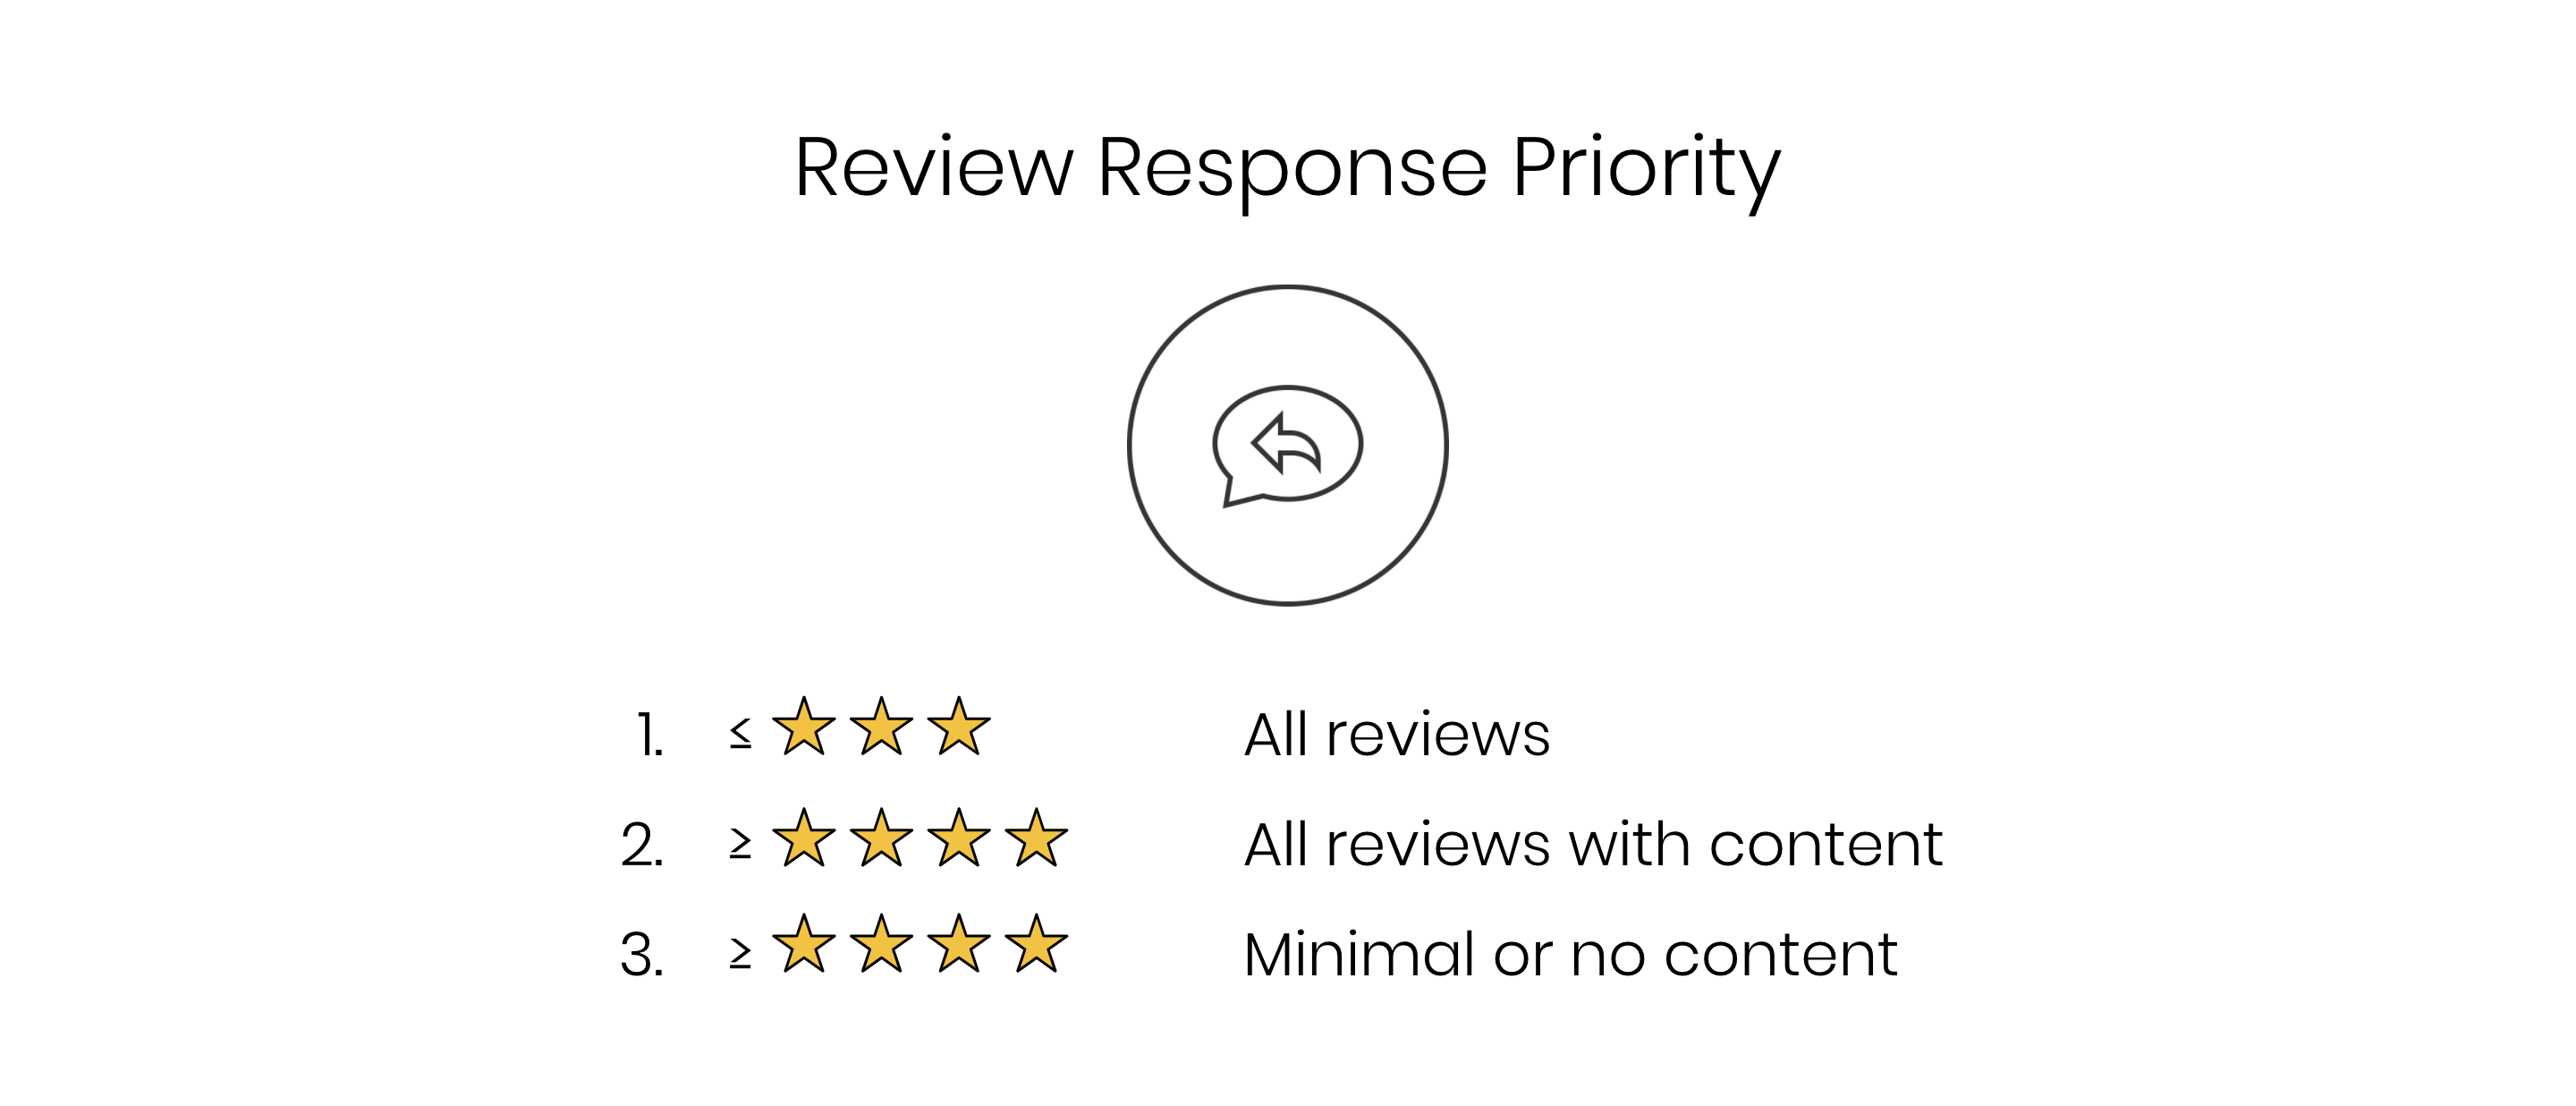 priority of reviews to respond to